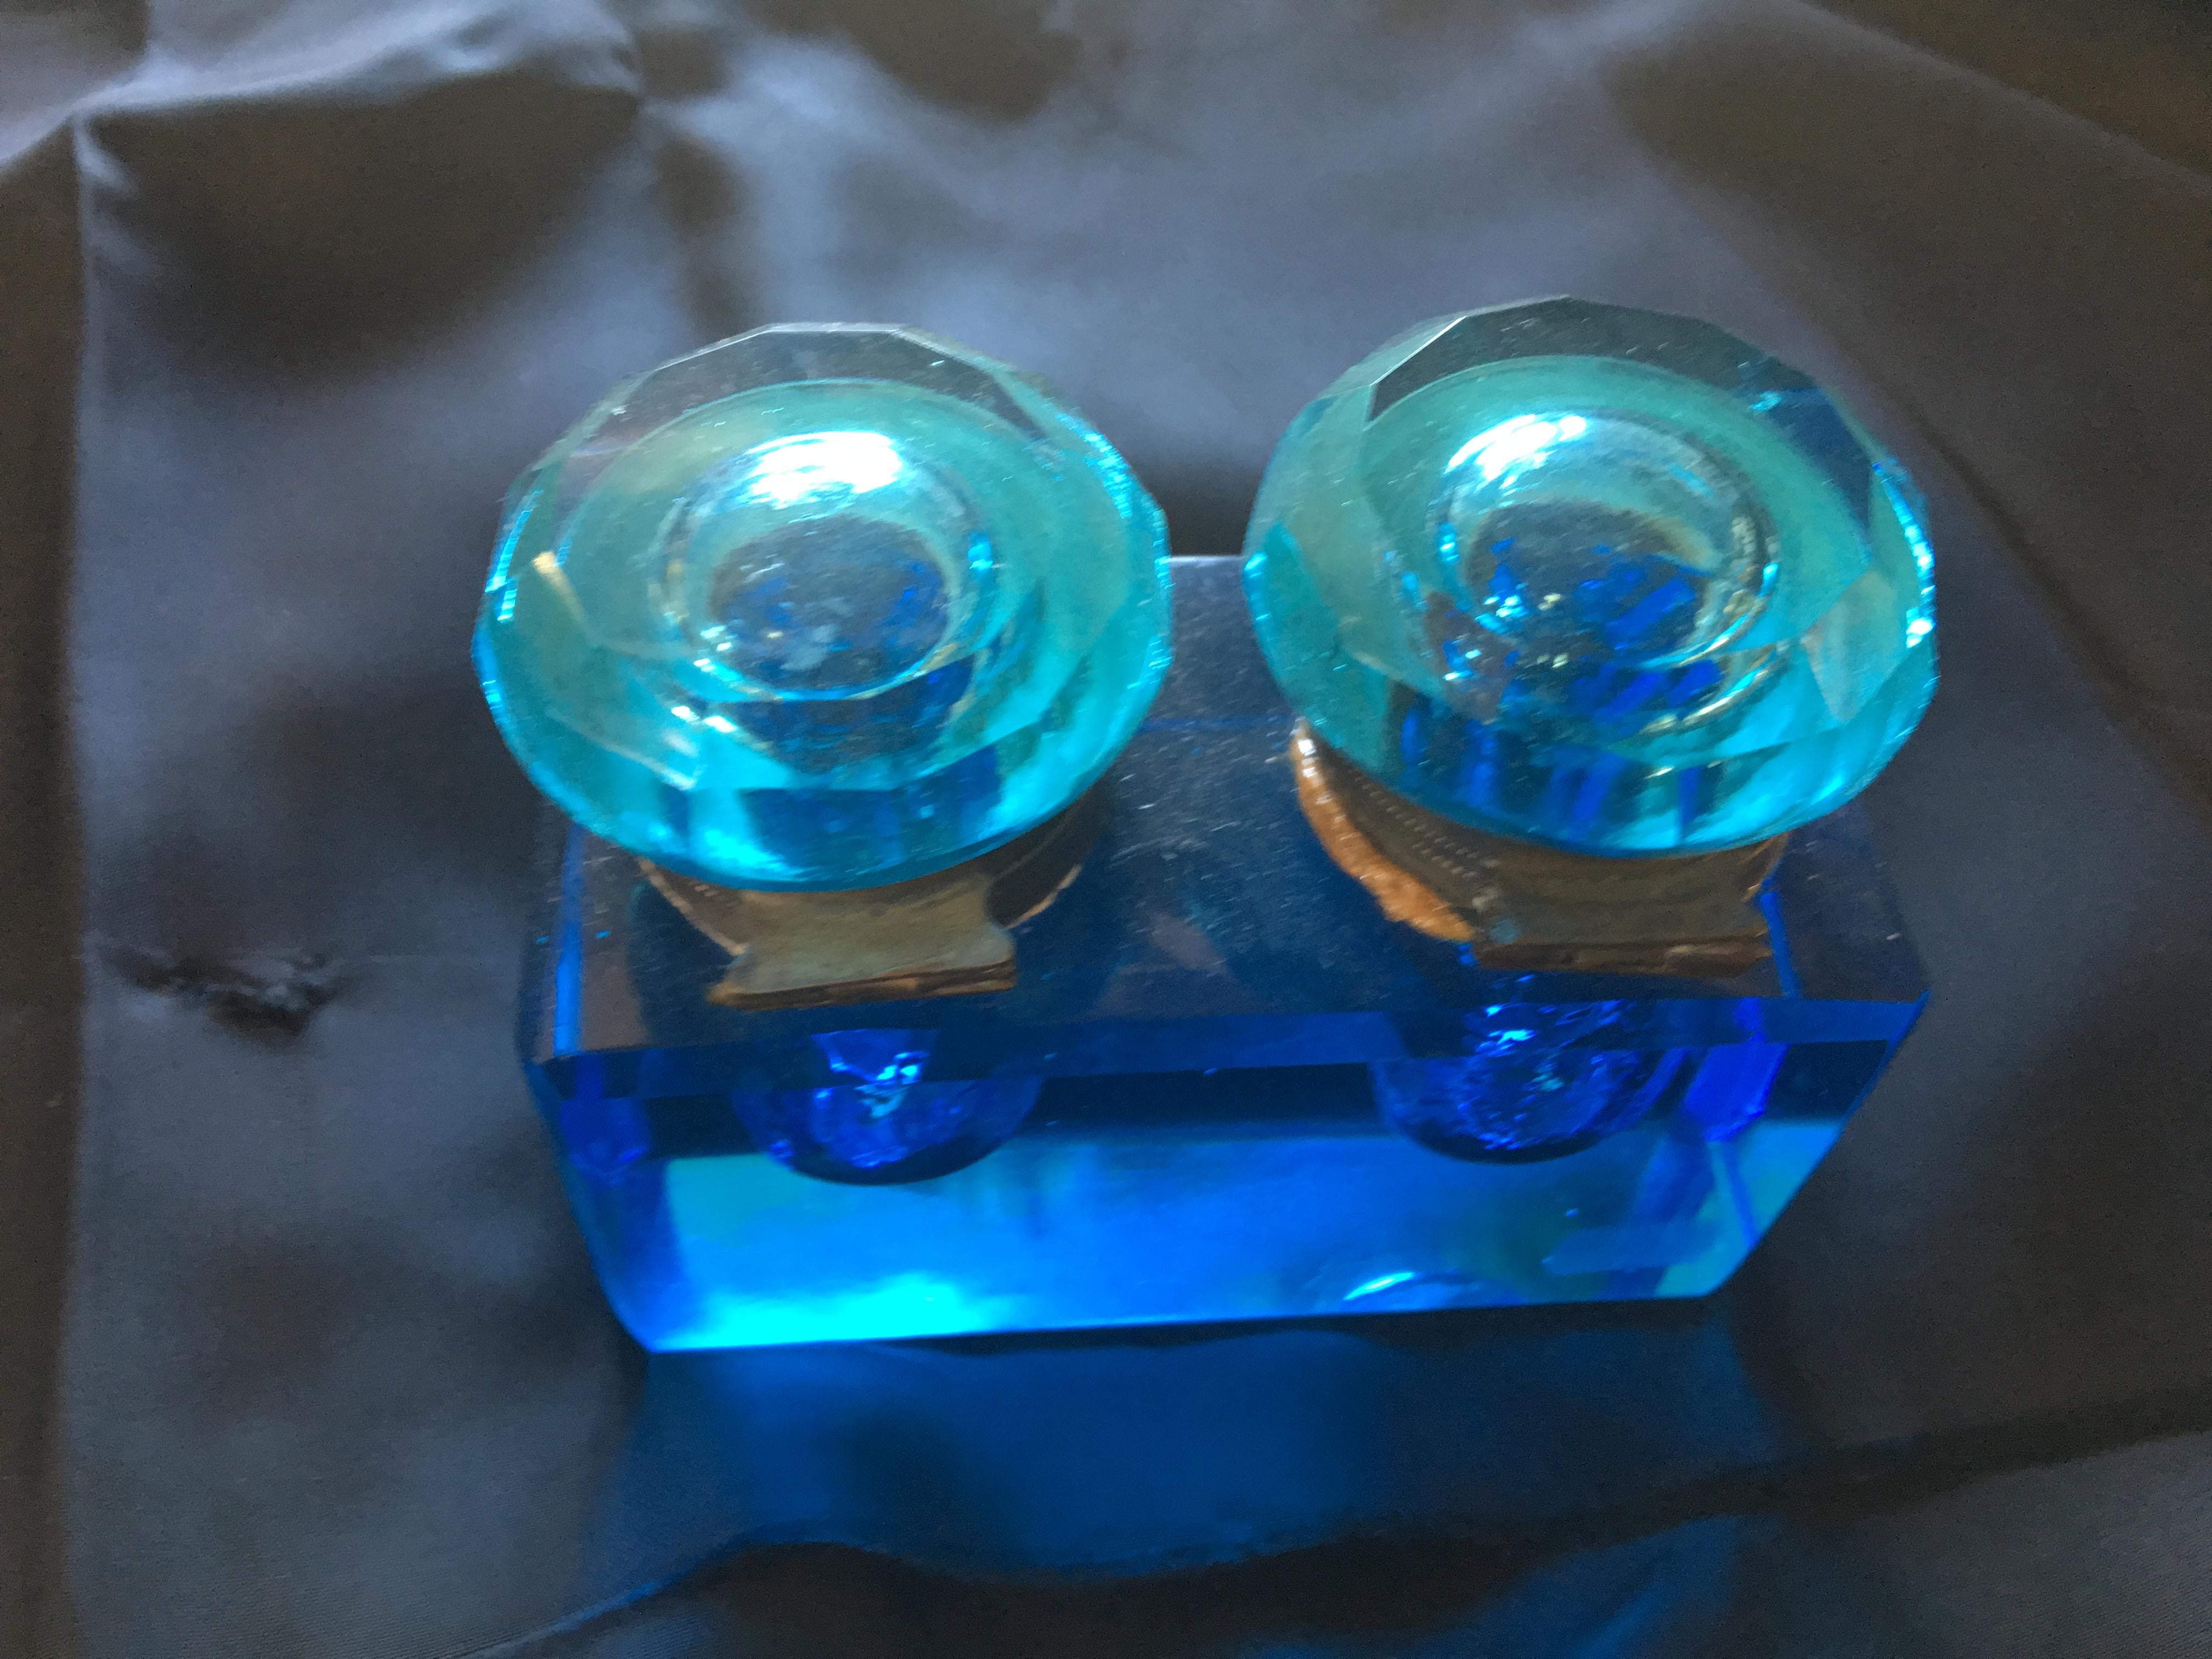 Vintage rare late 19th century light blue crystal inkwell. Beautiful blue inkwells with bottles and attached tops. Rare and hard to find color.